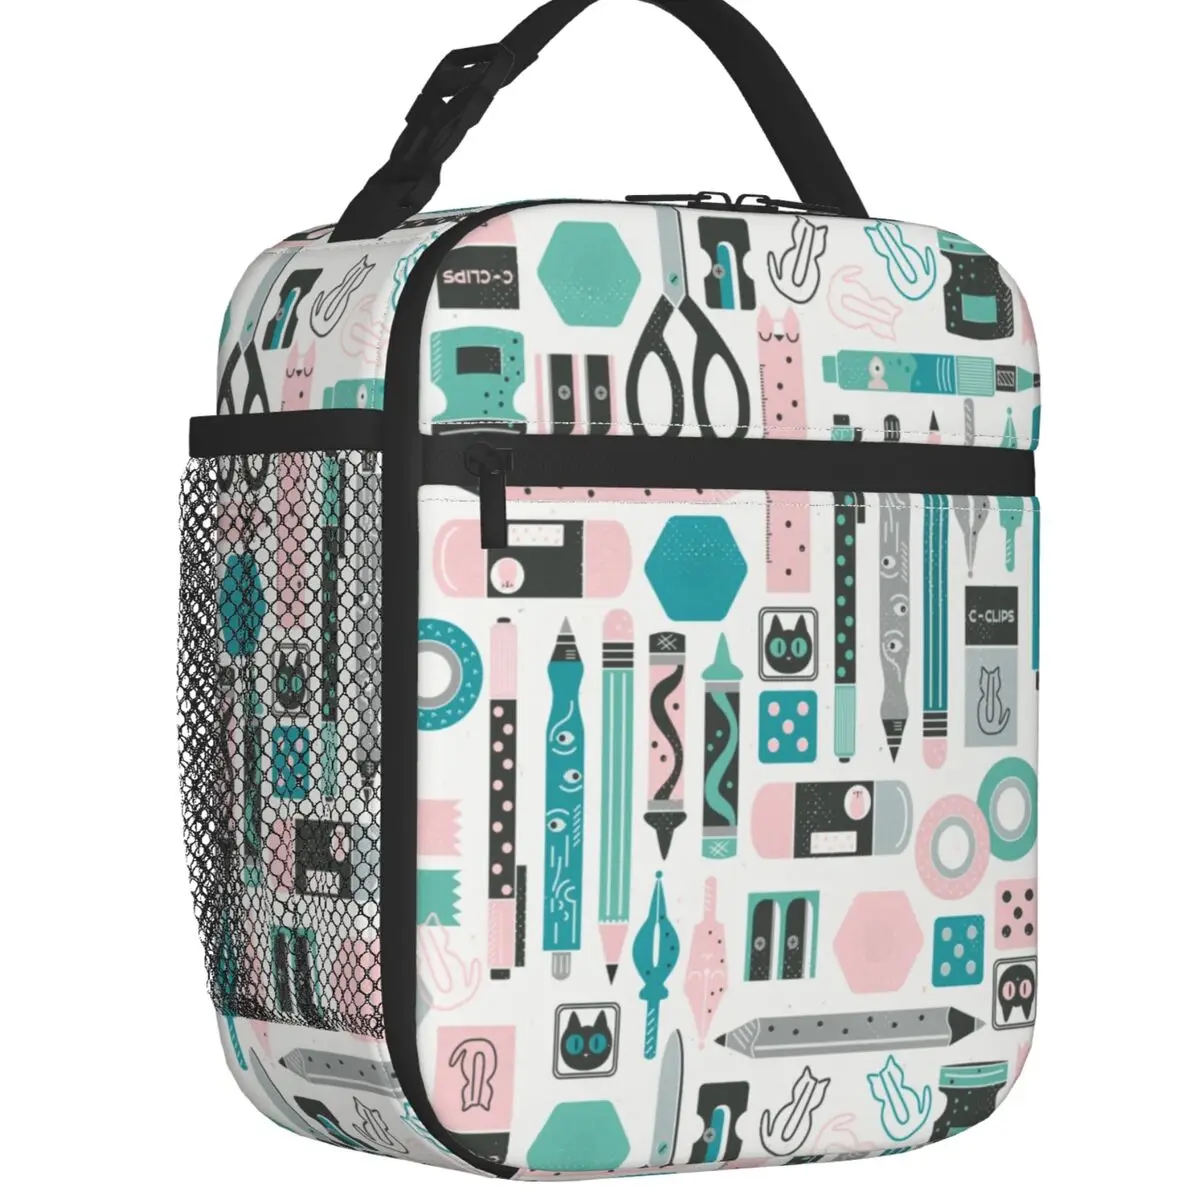 Back To School Pattern Insulated Lunch Bags Teacher Pencils Stationery Love Portable Cooler Thermal Food Lunch Box Kids Children